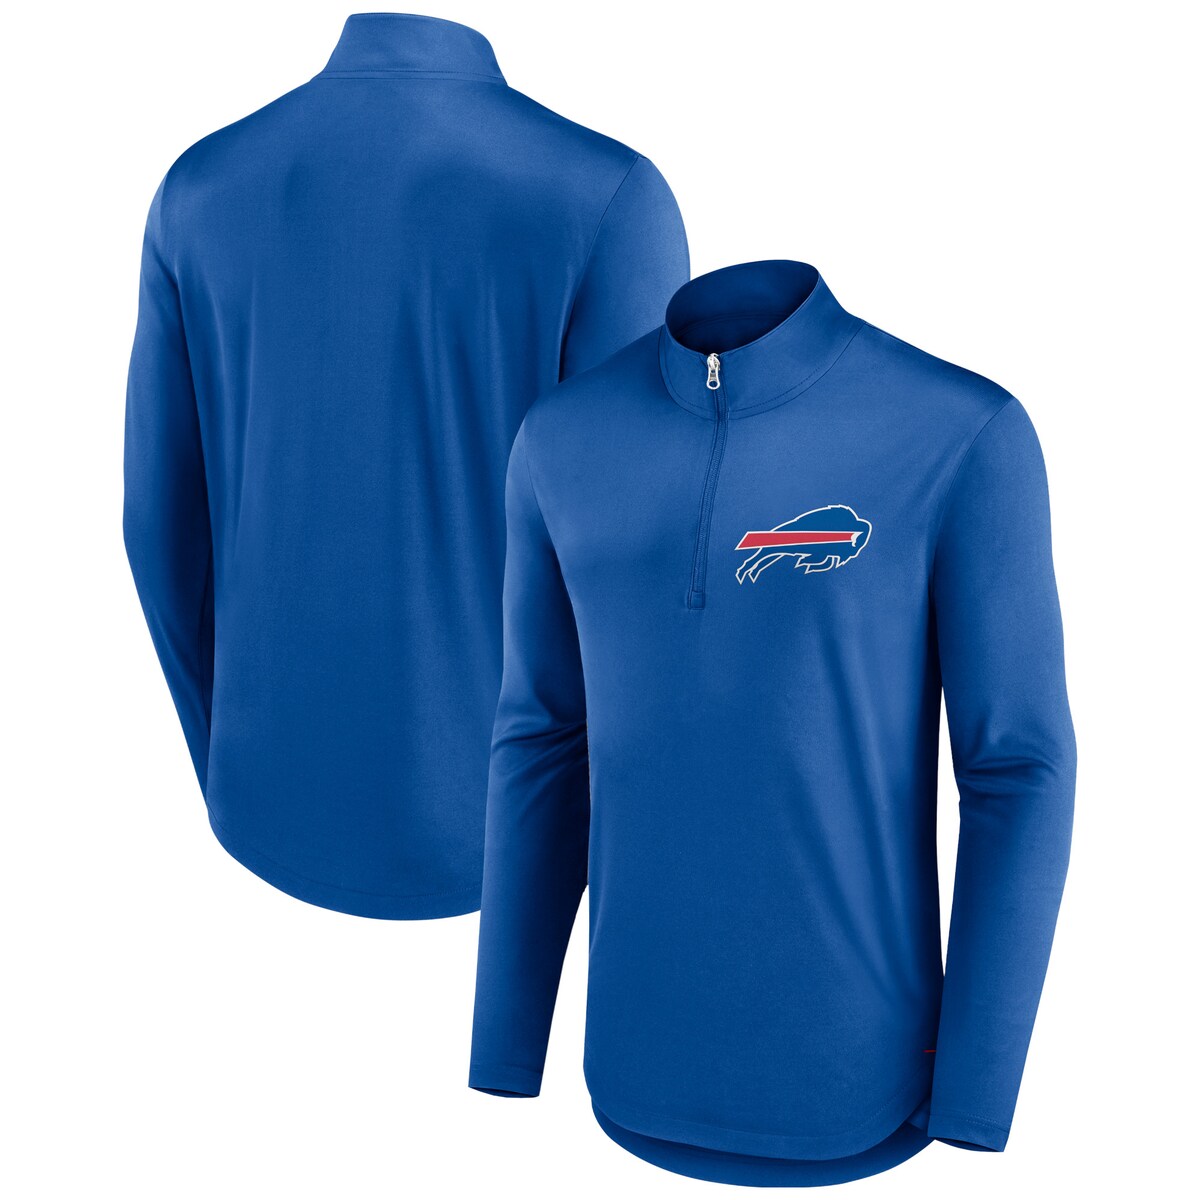 Sport this Fanatics Branded Tough Minded quarter-zip when you want to flex your Buffalo Bills pride in a comfortable fashion. Its lightweight design provides you with the ideal amount of warmth and breathability. Plus, the Buffalo Bills graphics complete this top for a striking game day or casual layering option.Machine wash, tumble dry lowOfficially licensedBrand: Fanatics BrandedLightweight pullover suitable for mild temperaturesLong sleeve1/4-ZipMock neckImportedScreen print graphicsMaterial: 100% PolyesterRounded droptail hem1/4-Zip